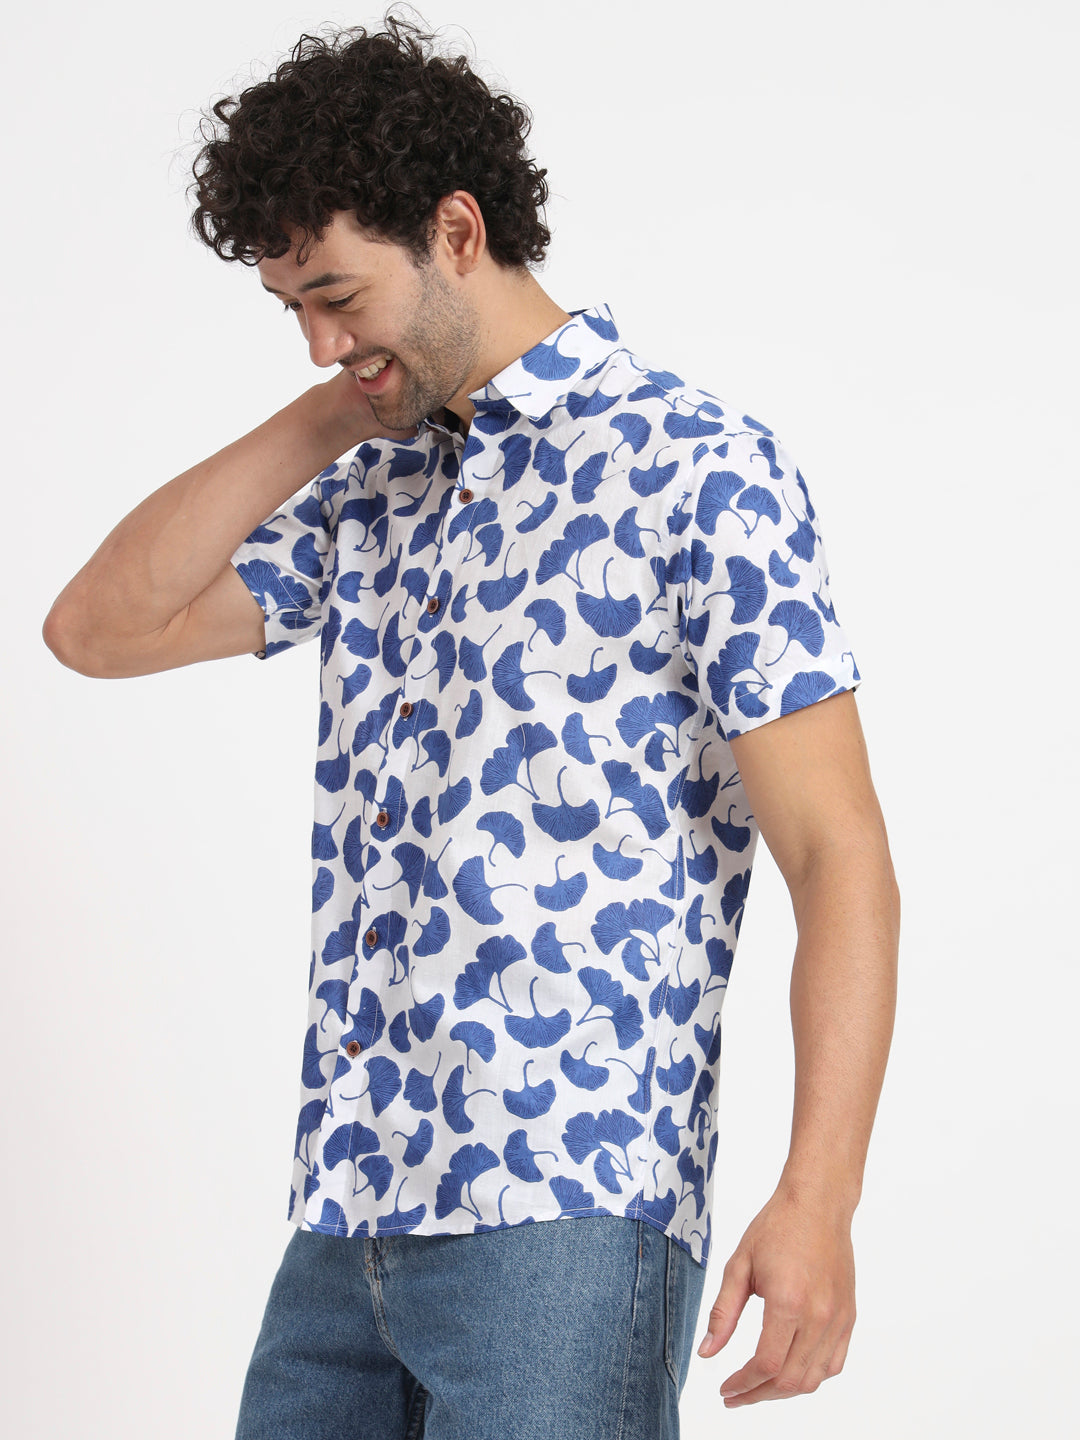 Firangi Yarn Floral Printed Cotton White and Blue Shirt For Men